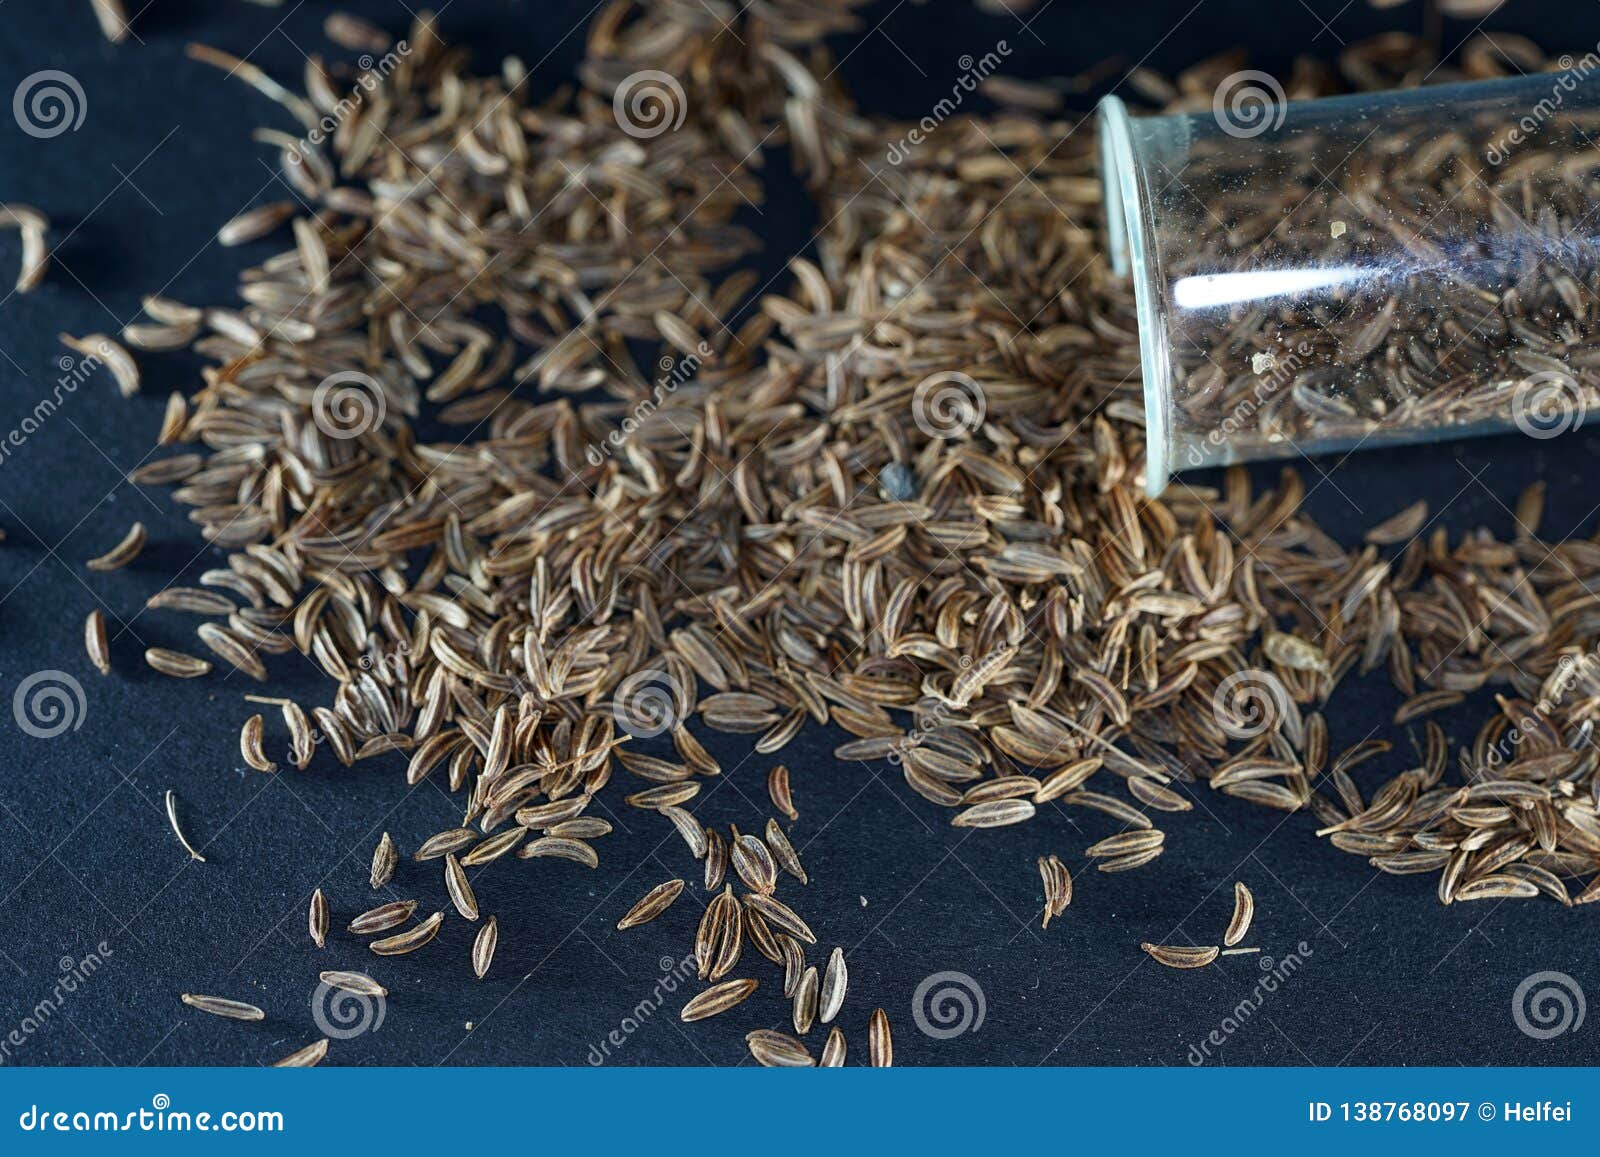 caraway seeds are particularly popular in jewish